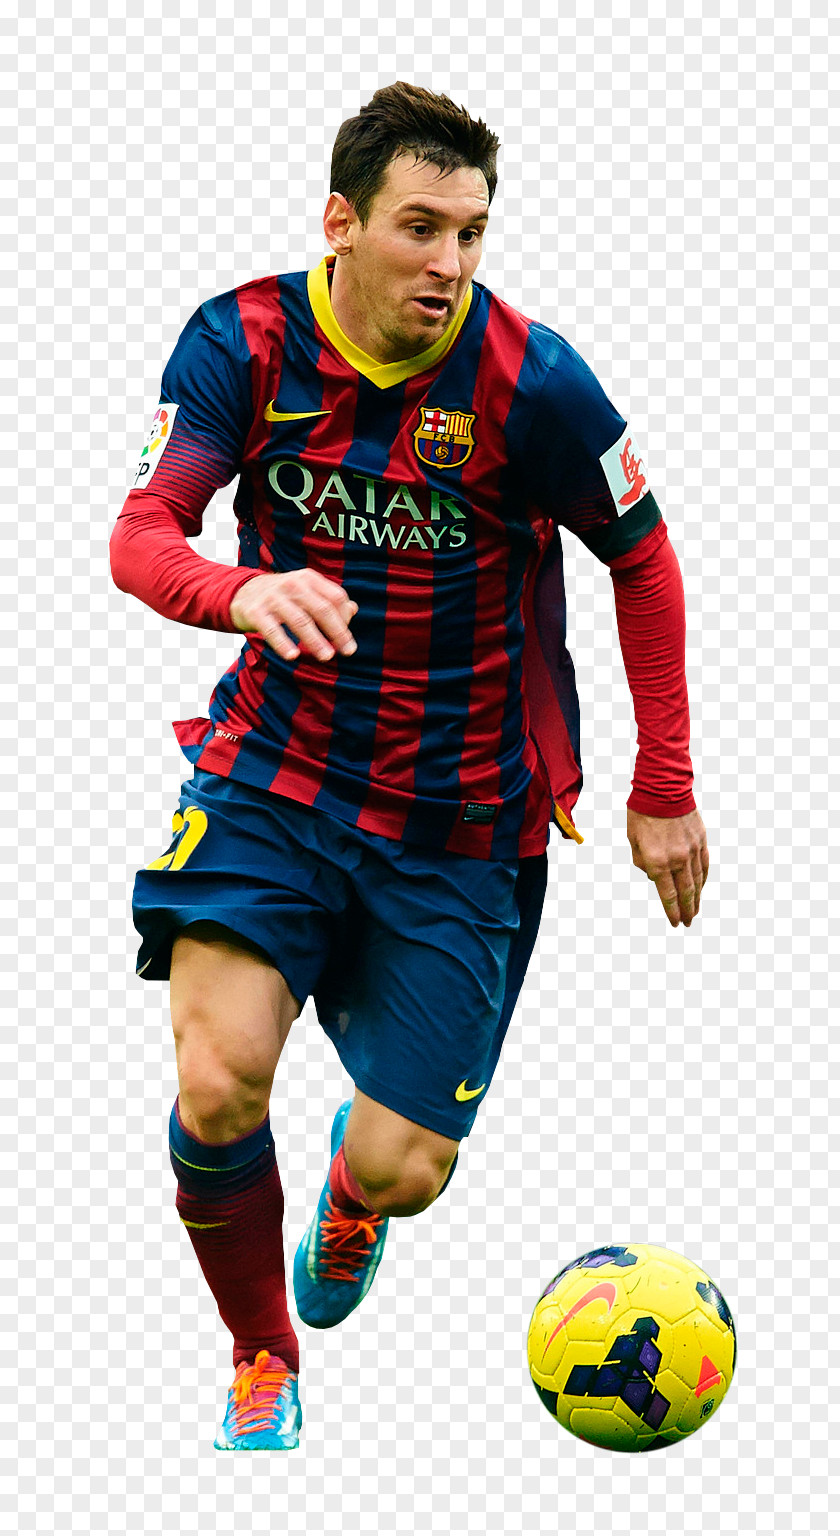 Lionel Messi 2014 FIFA World Cup Argentina National Football Team FC Barcelona Player PNG